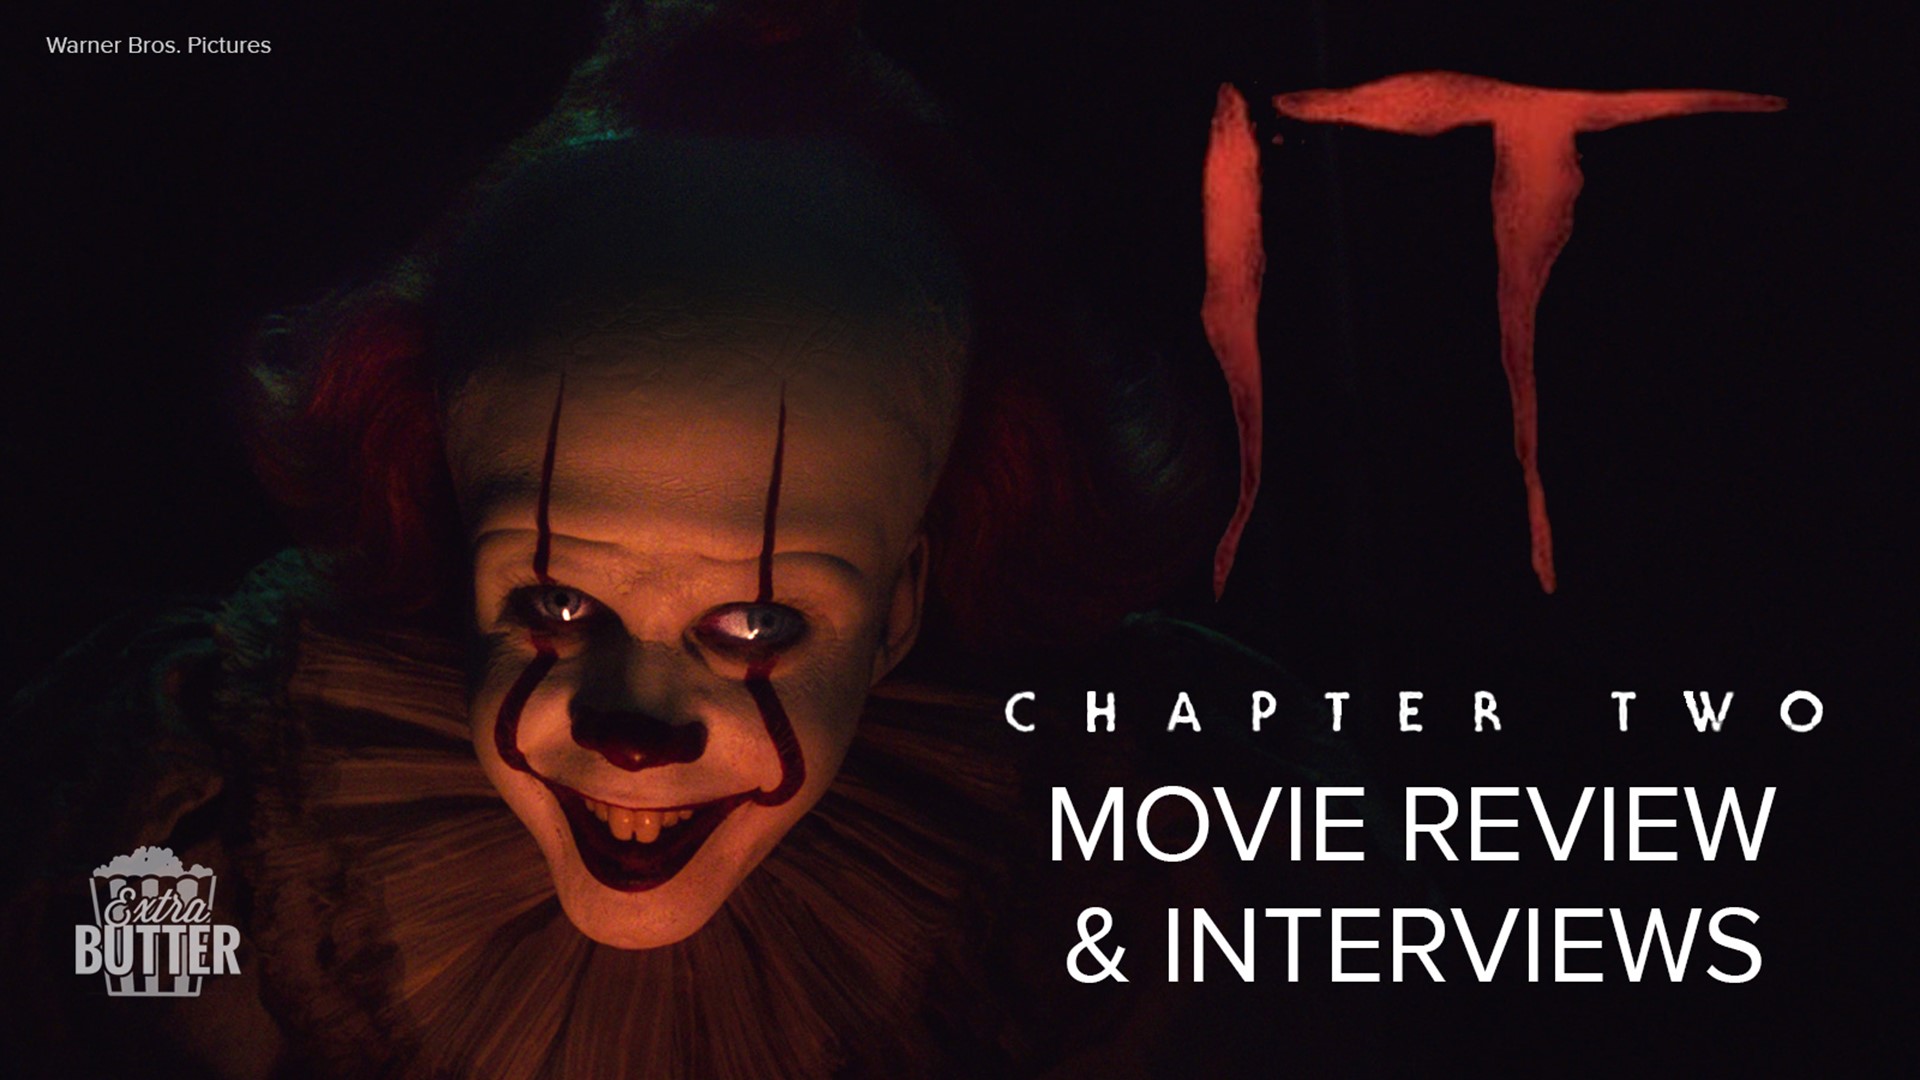 Extra Butter reviews the new movie 'IT Chapter Two' from the premiere of the film. Hear from the stars of the movie in parts 2, 3 & 4 of this week's episode. Footage provided by Warner Bros.